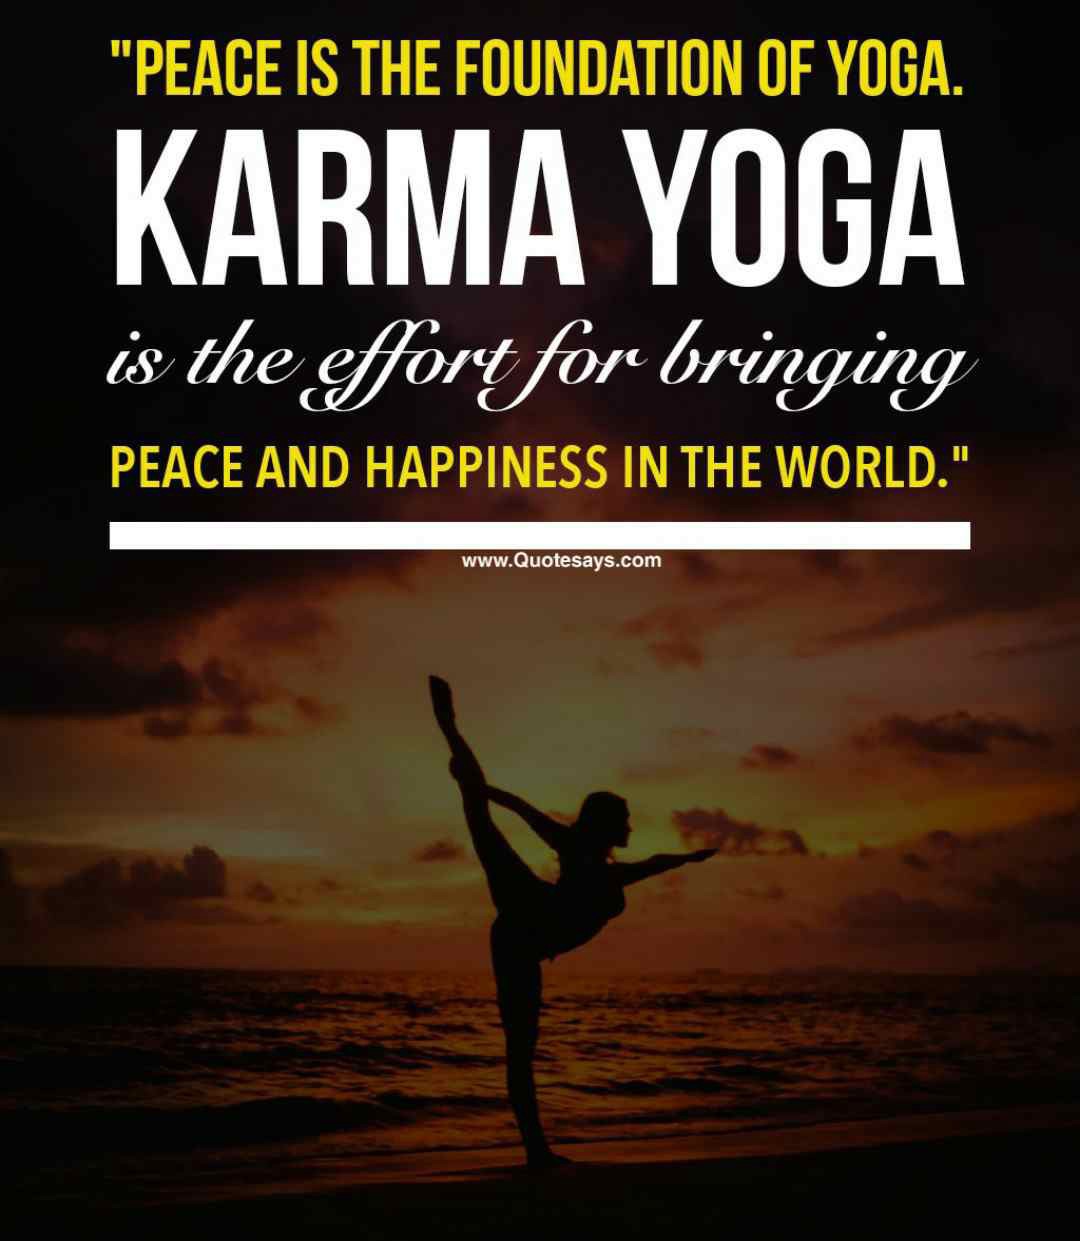 peace is the foundation of yoga. karma yoga is the effort for bringing peace and happiness in the world.